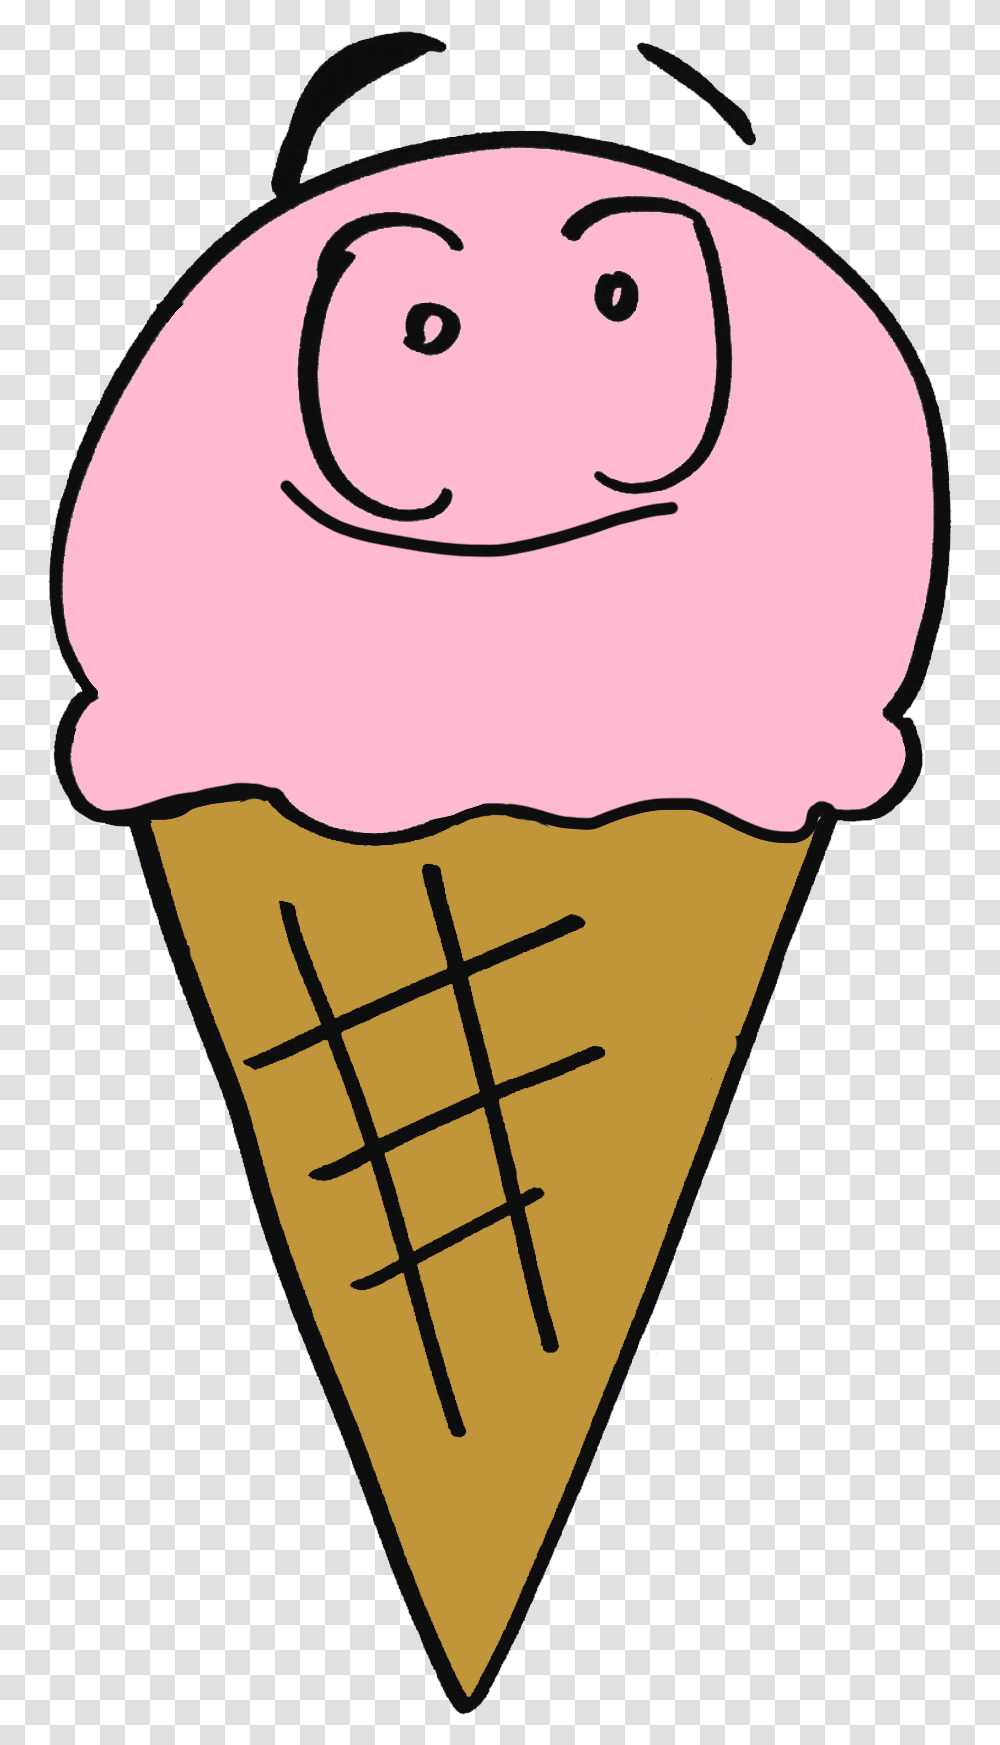 Cartoon Ice Cream With Sprinkles Clipart Download Cartoon Ice Cream With Sprinkles, Dessert, Food, Creme, Icing Transparent Png